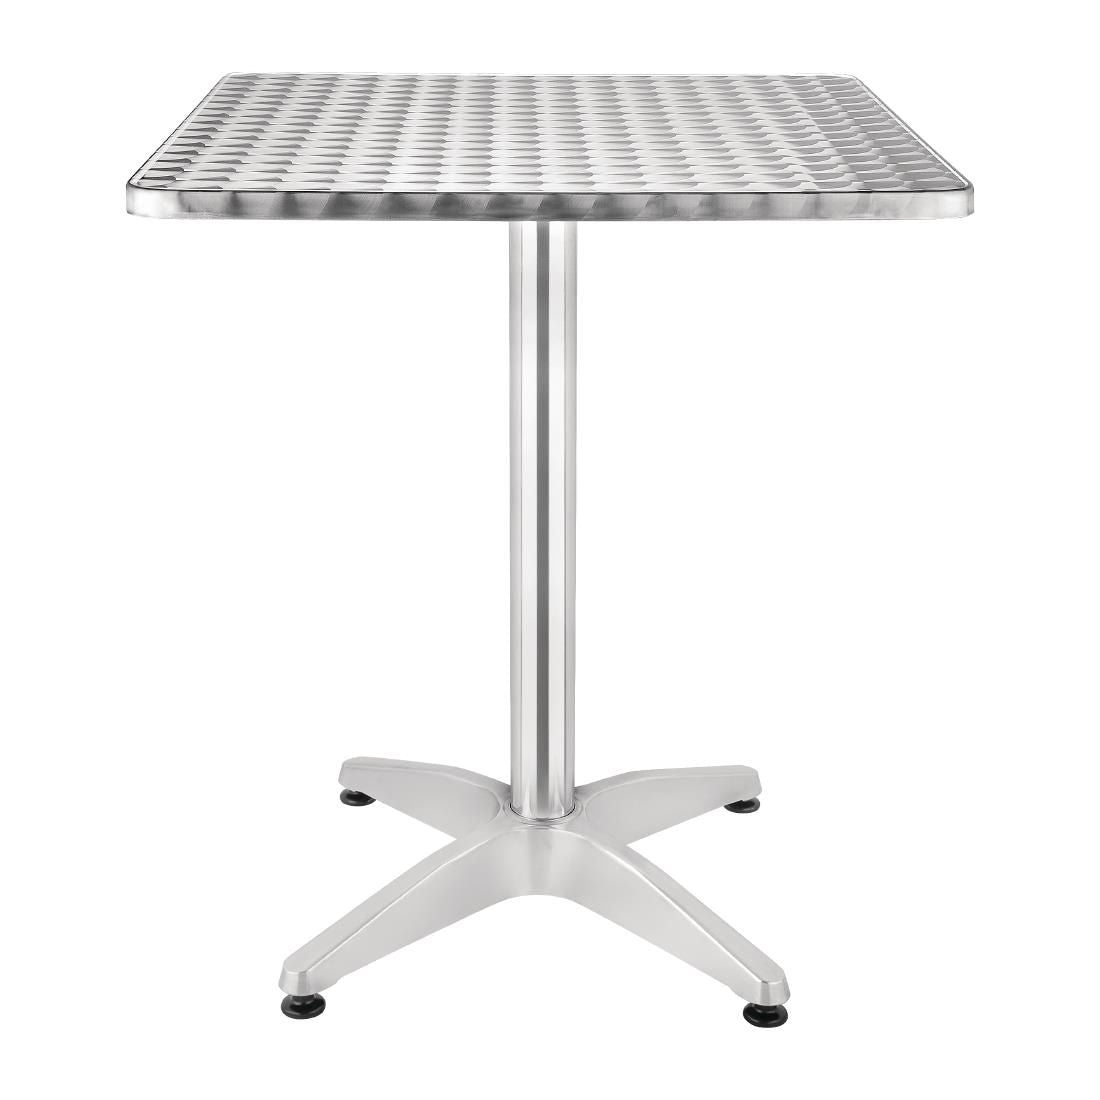 Bolero Square Bistro Table Stainless Steel 600mm JD Catering Equipment Solutions Ltd